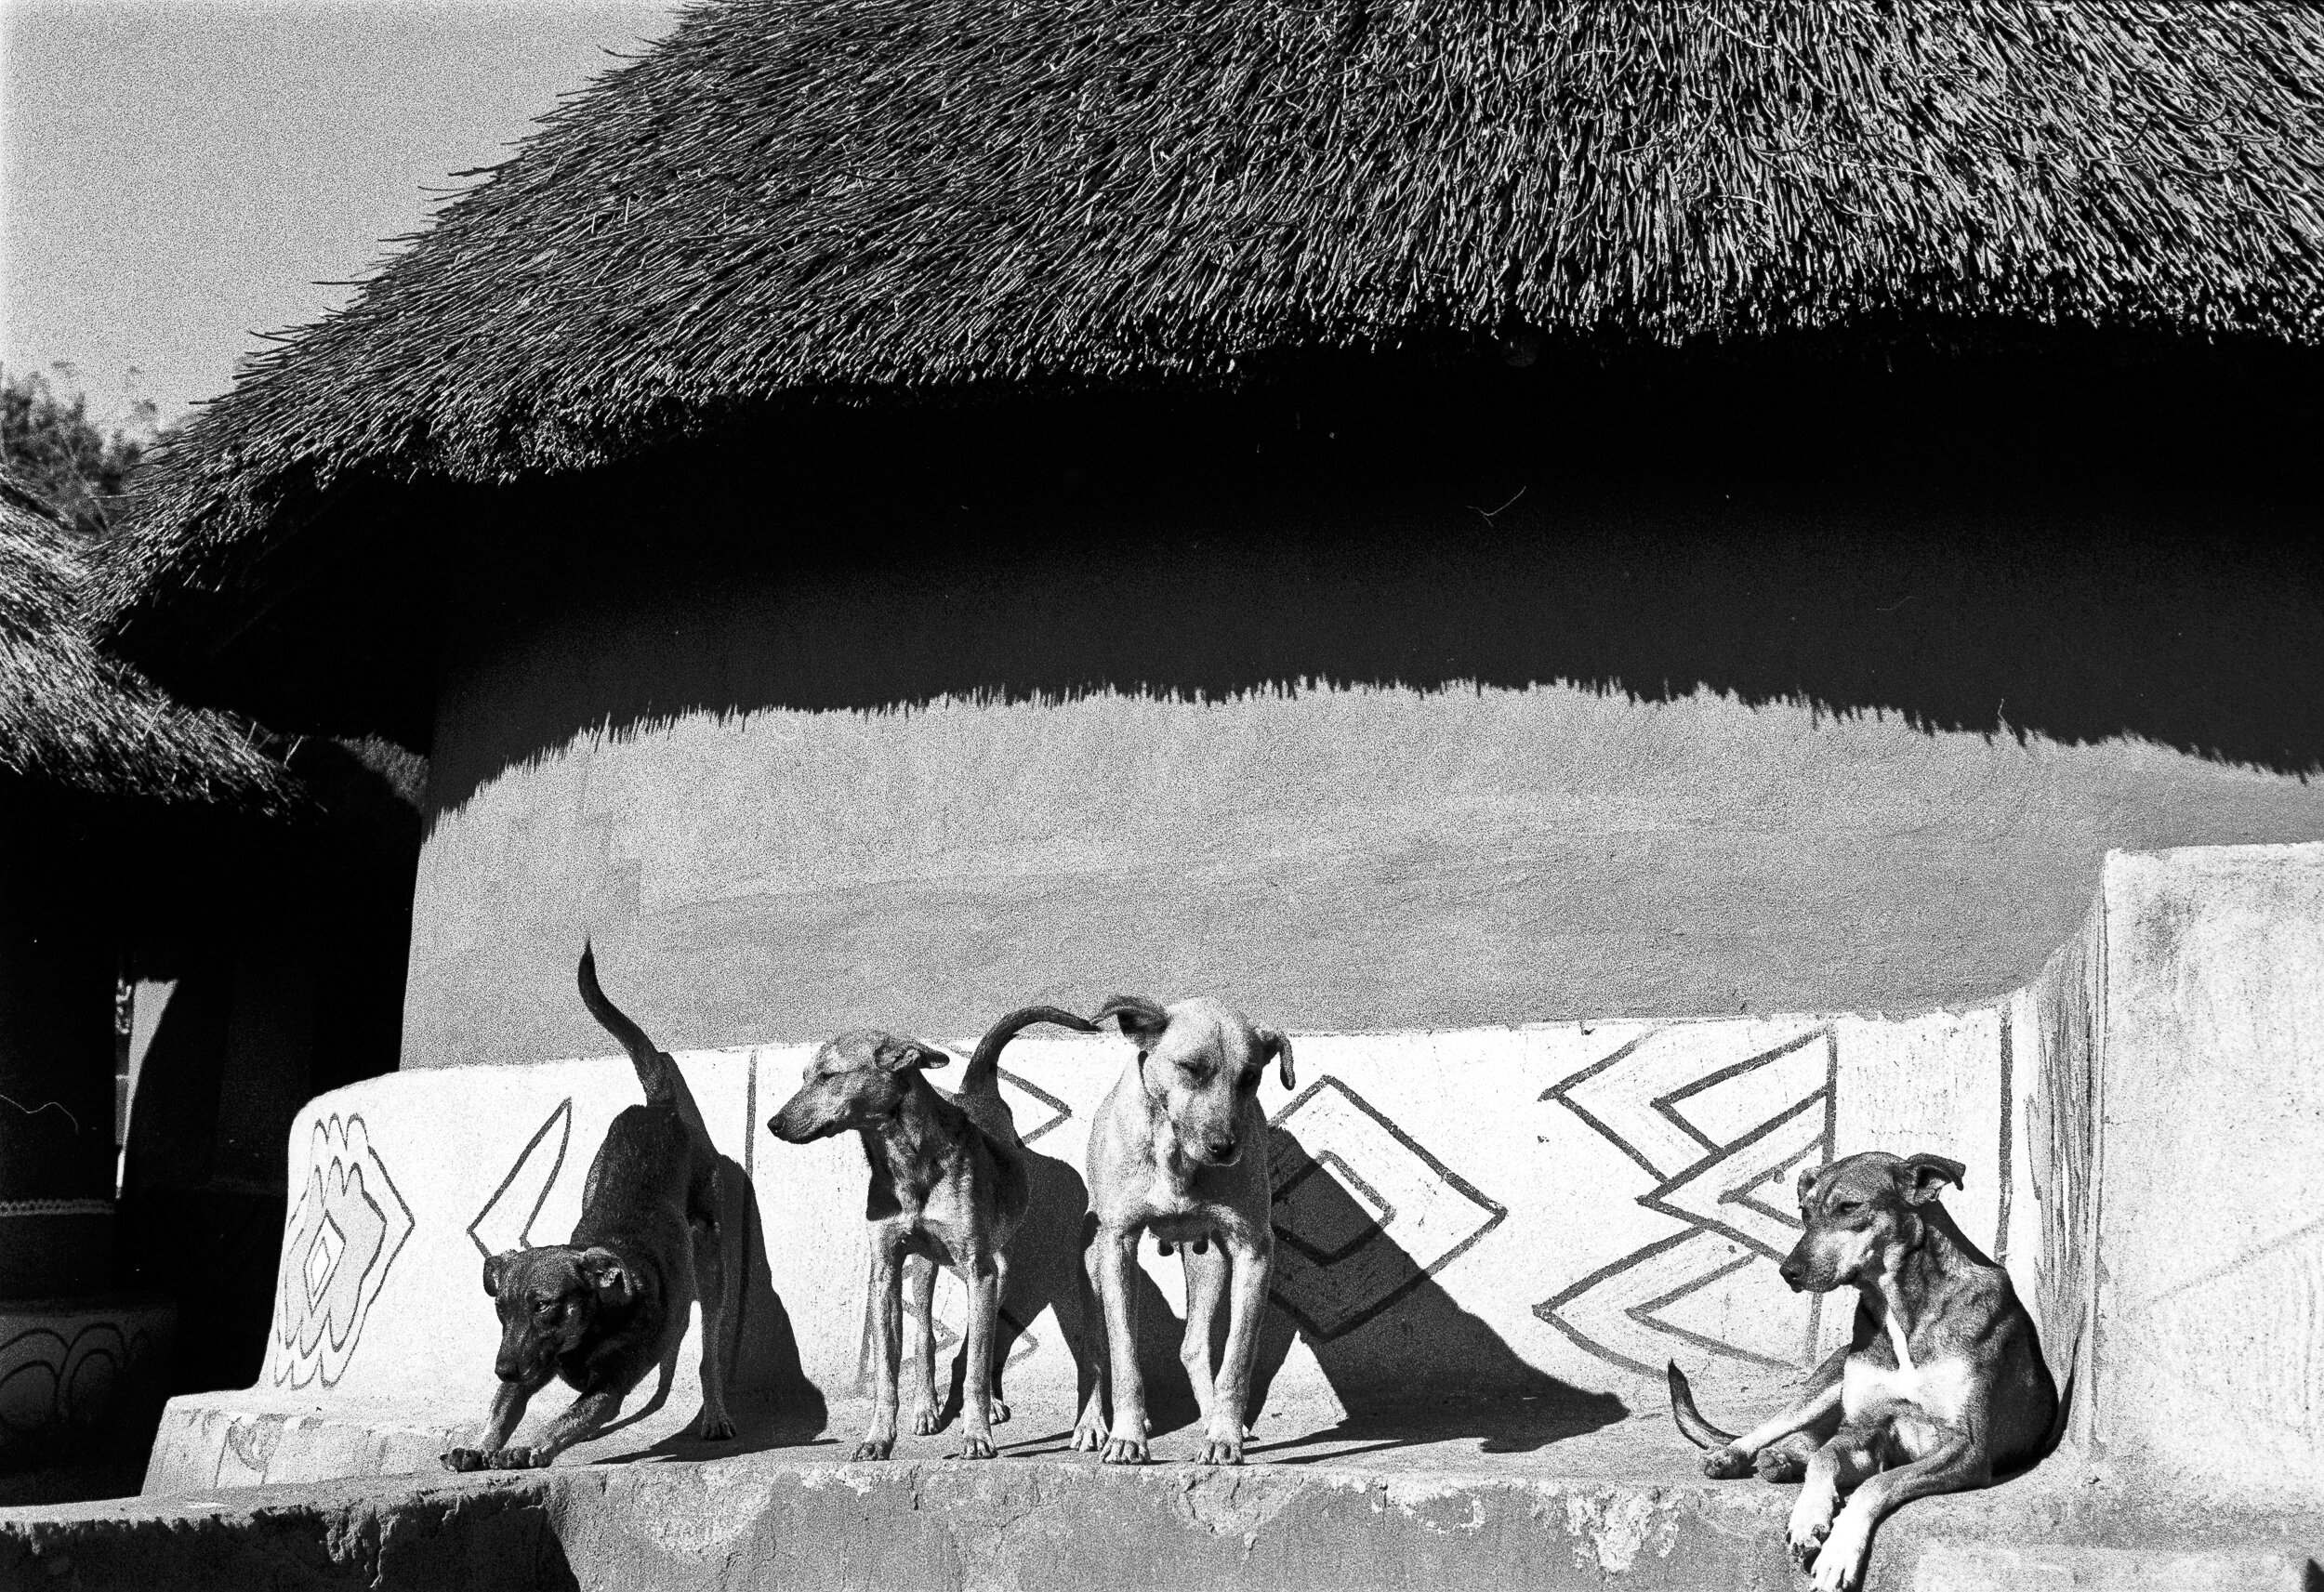  South Africa, Venda, June 2001. African dogs enjoying the late afternoon sun. Photo by Leonie Marinovich 